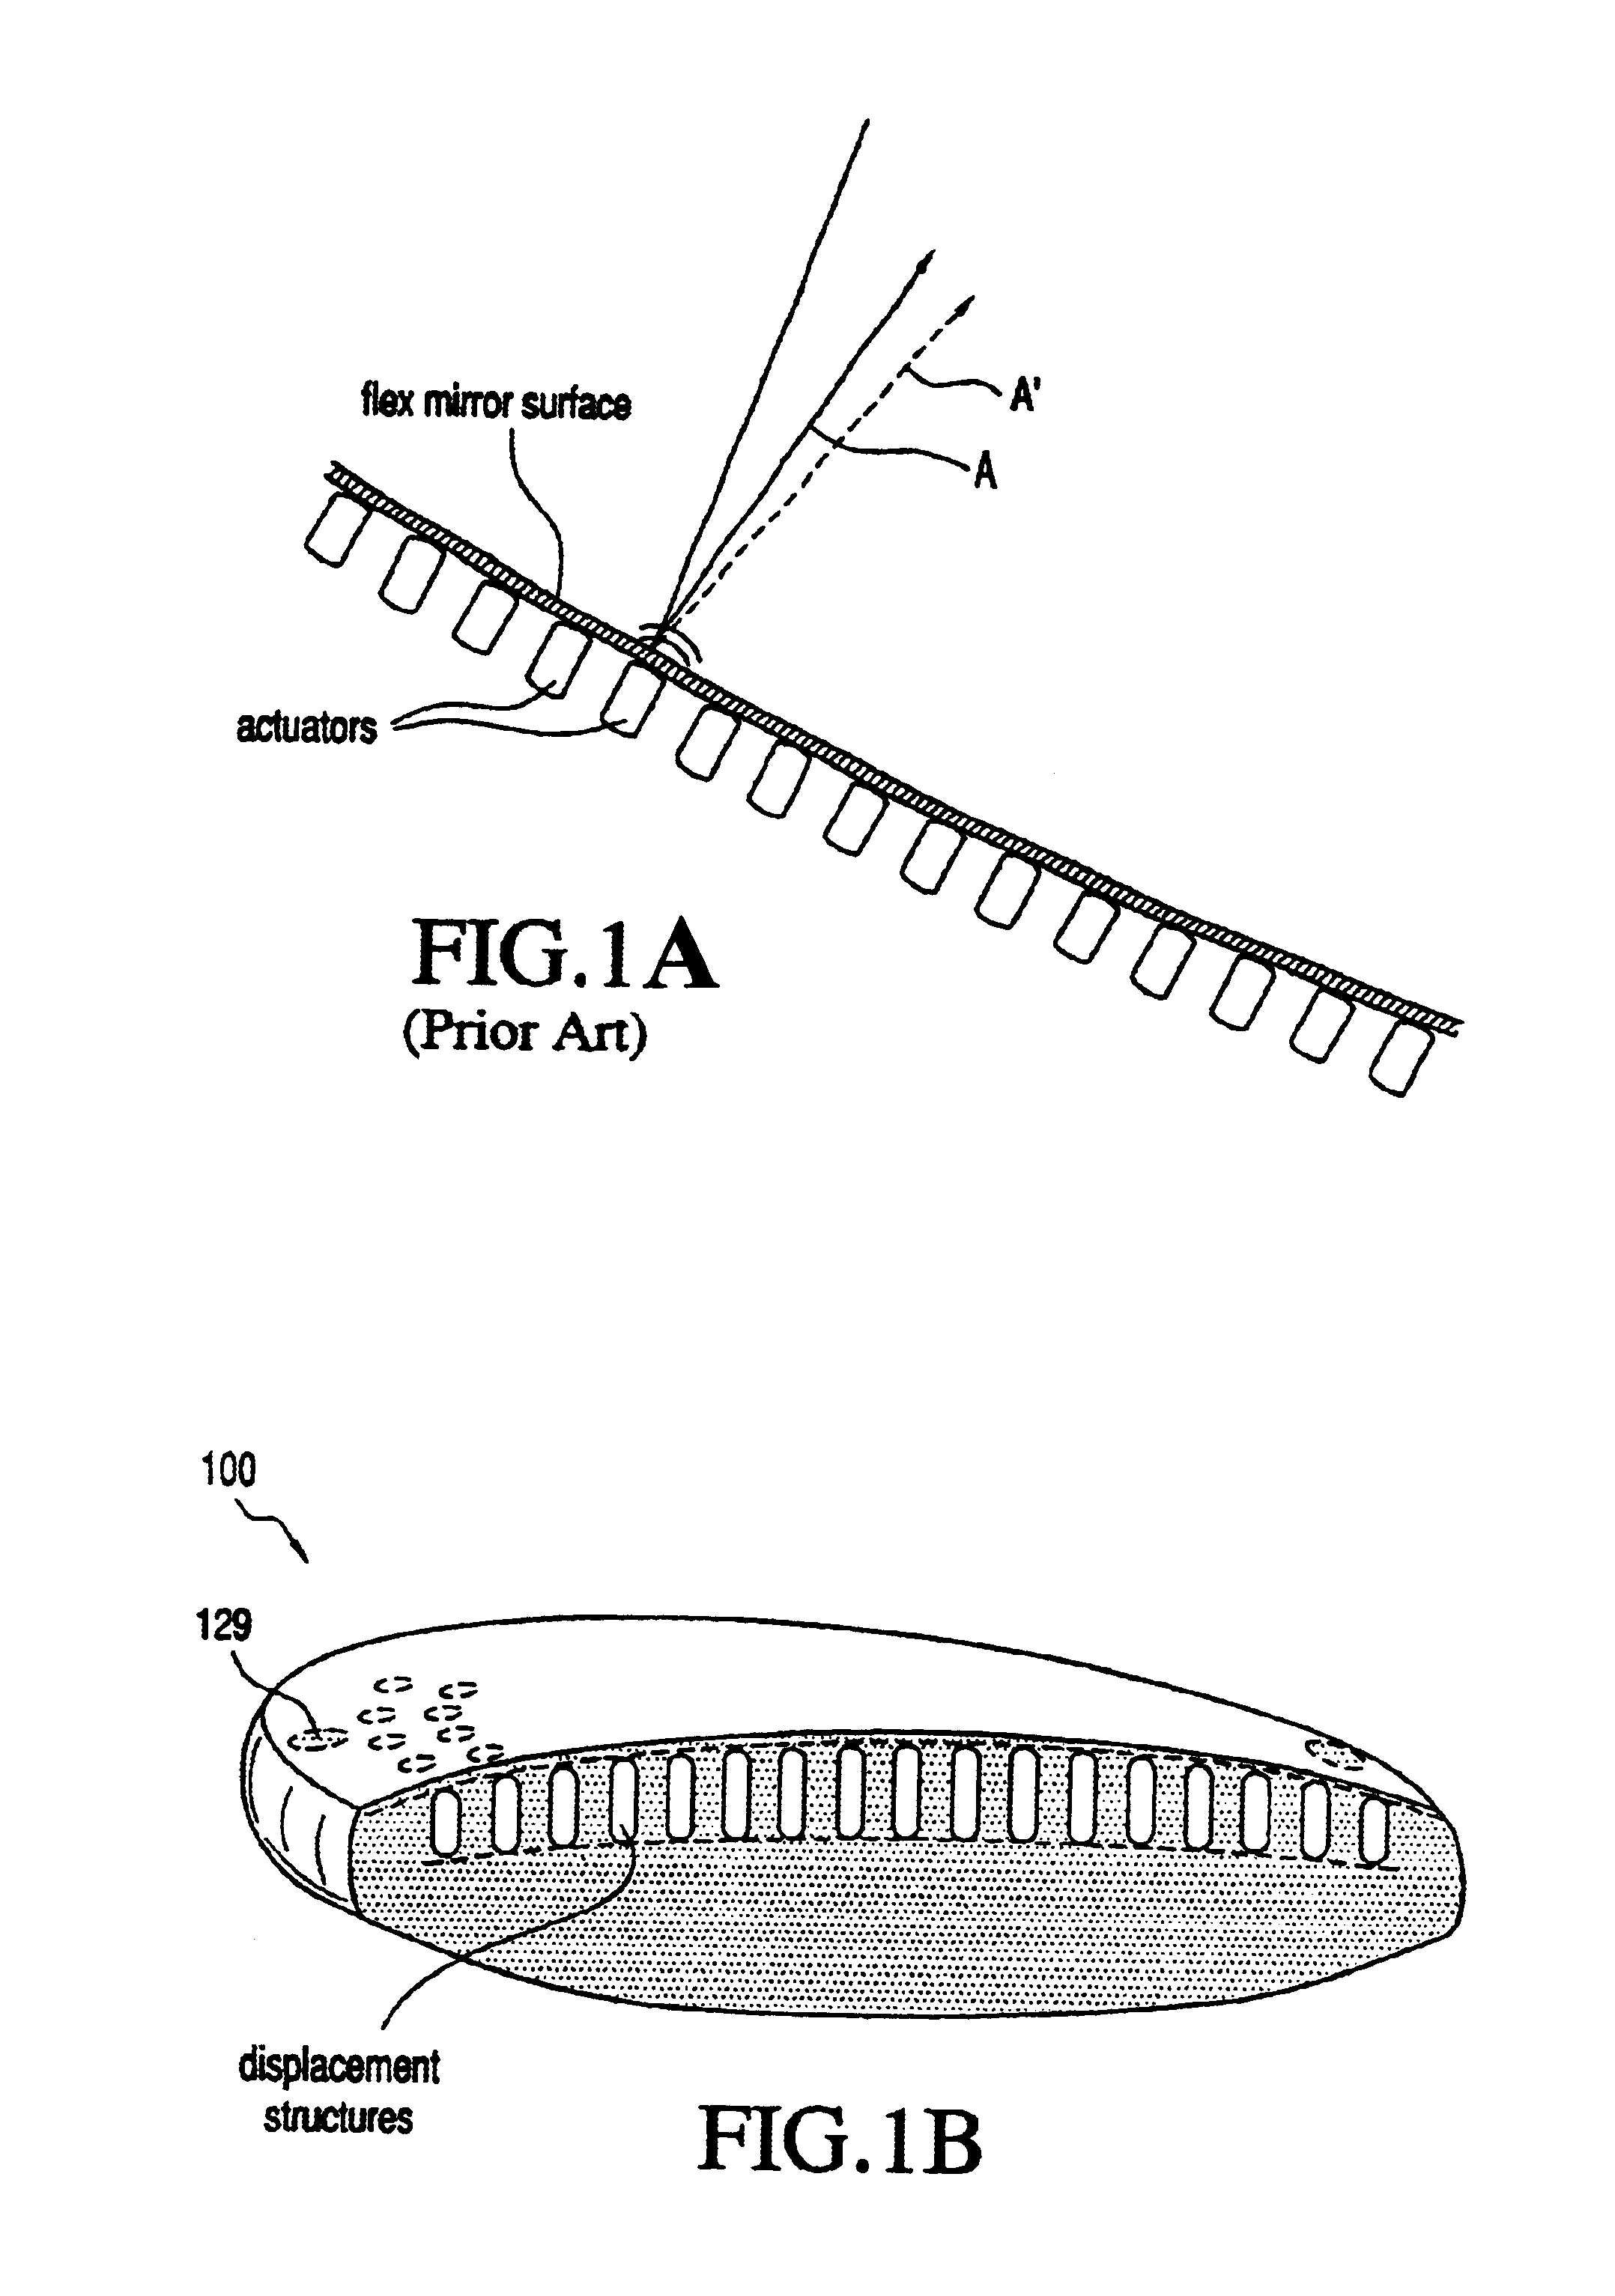 Adaptive optic lens system and method of use